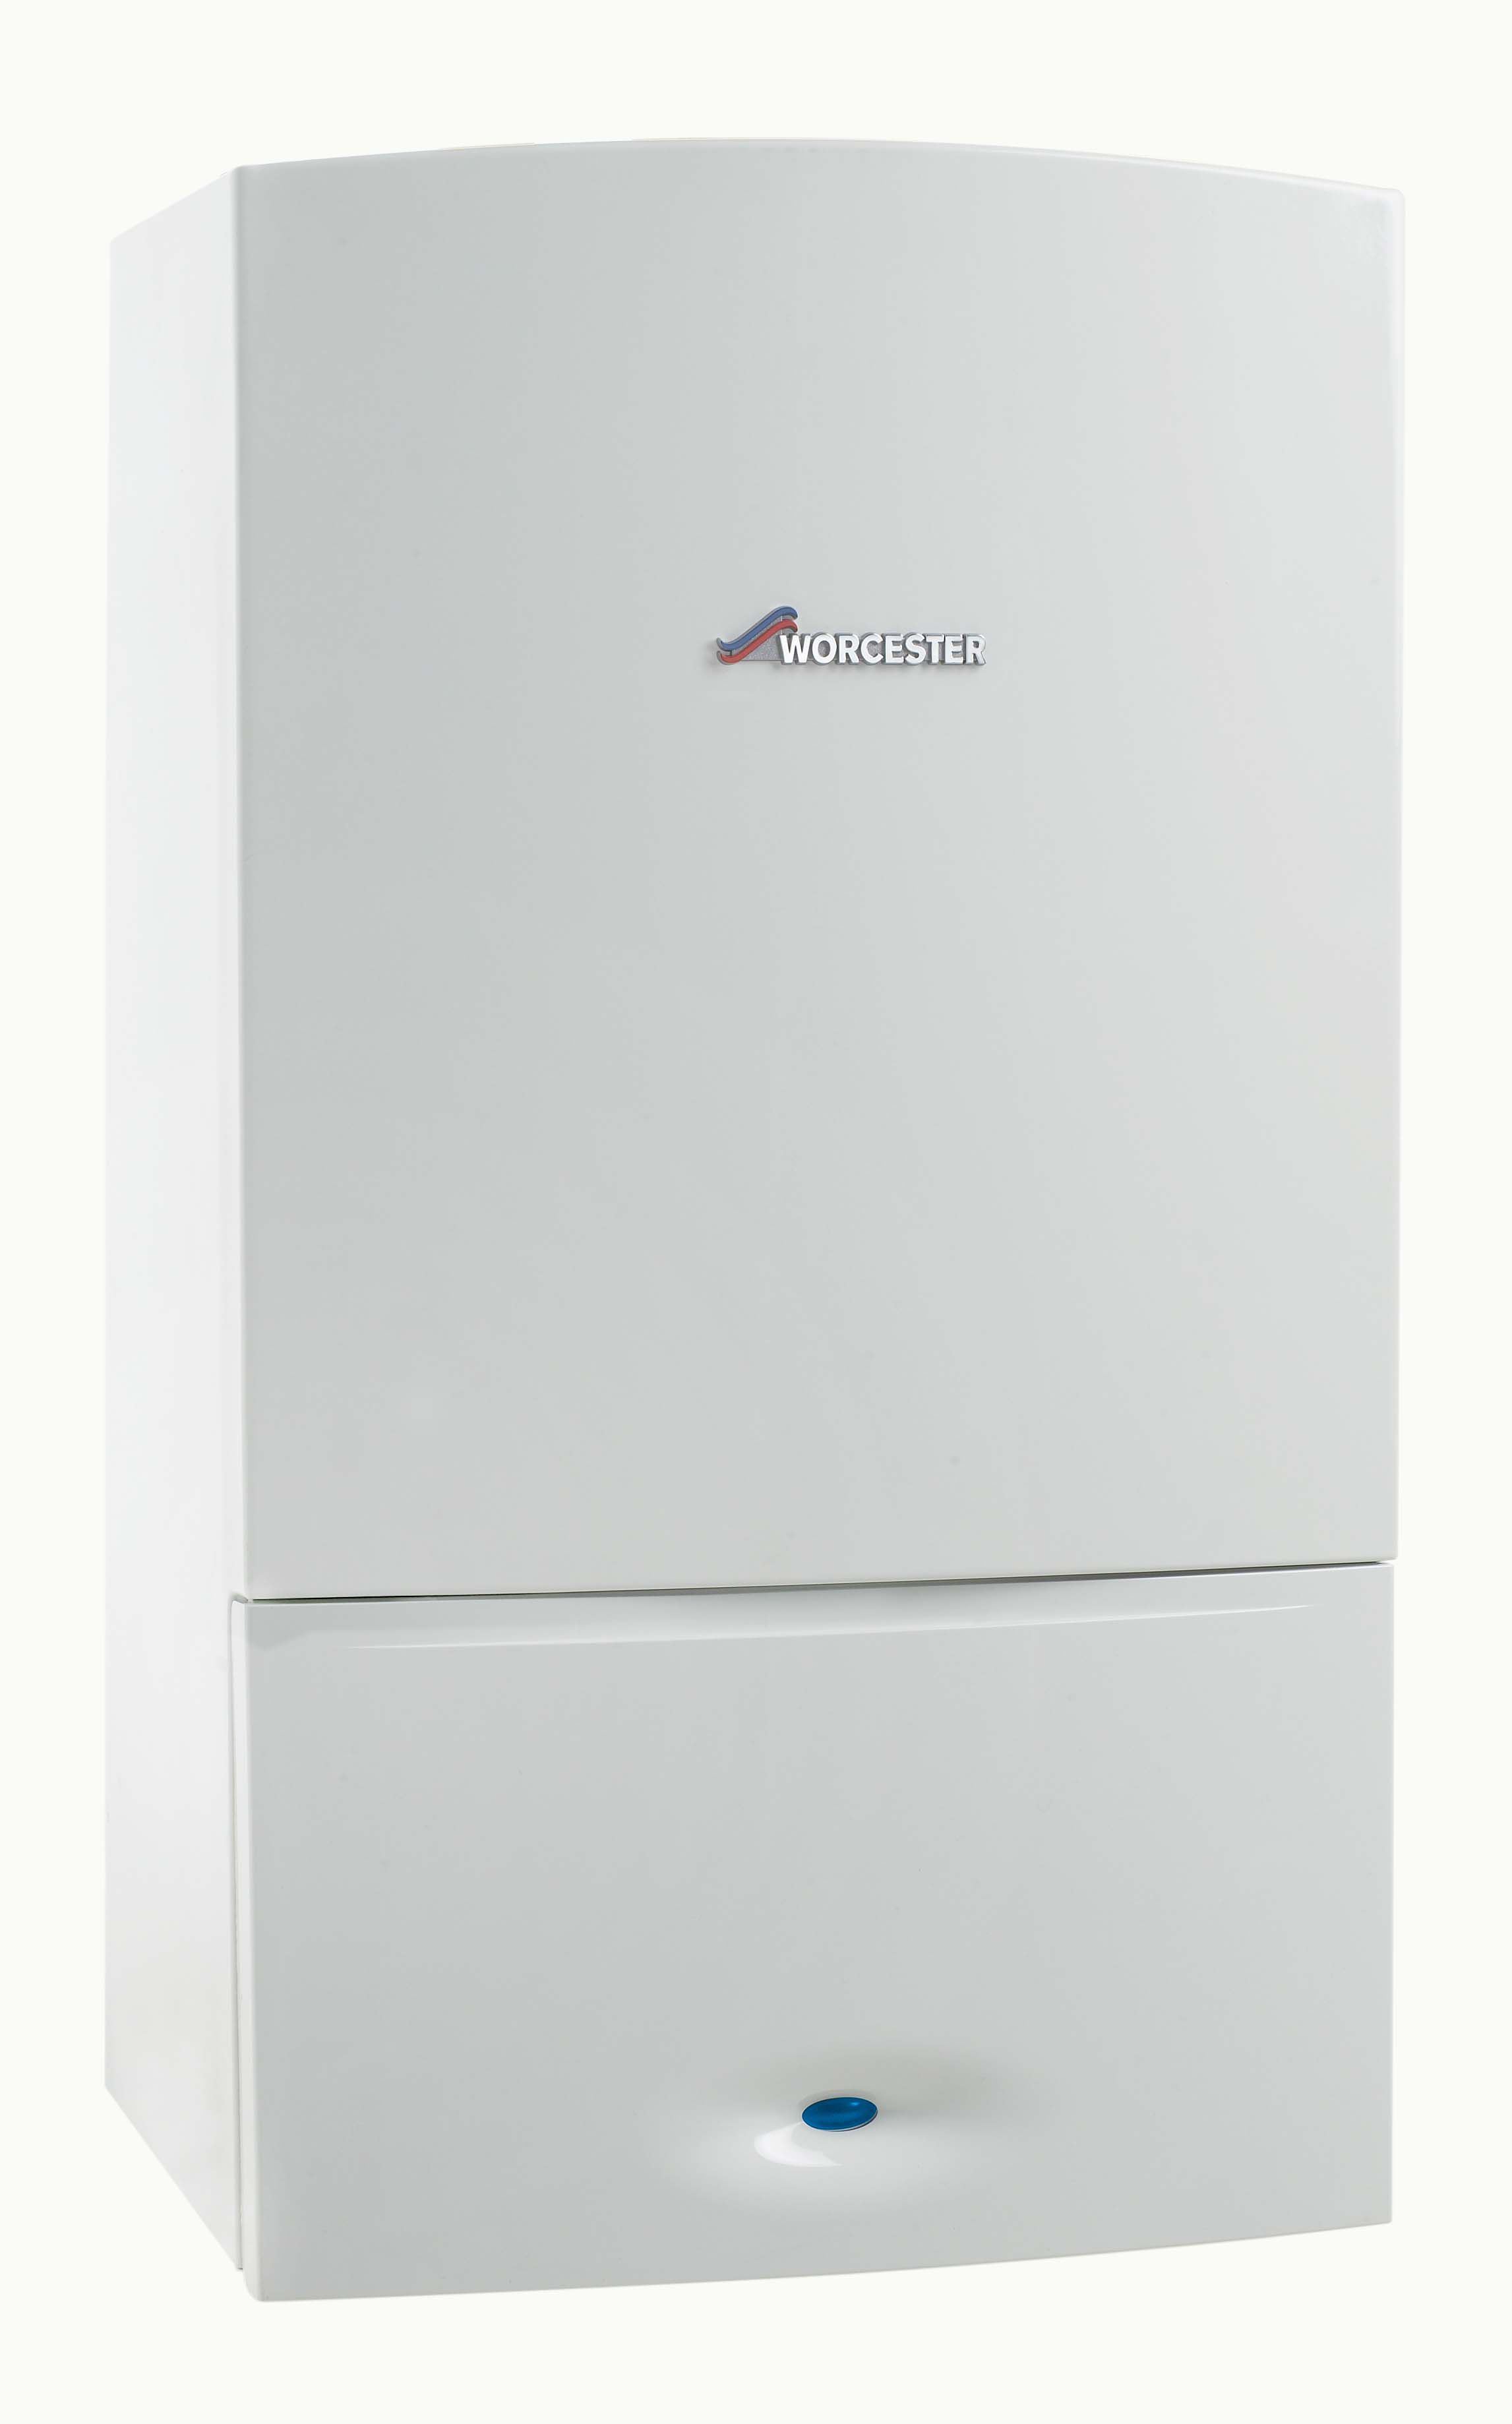 Image of Worcester Bosch Greenstar 28CDI Compact Natural Gas Combi Boiler - 28kW